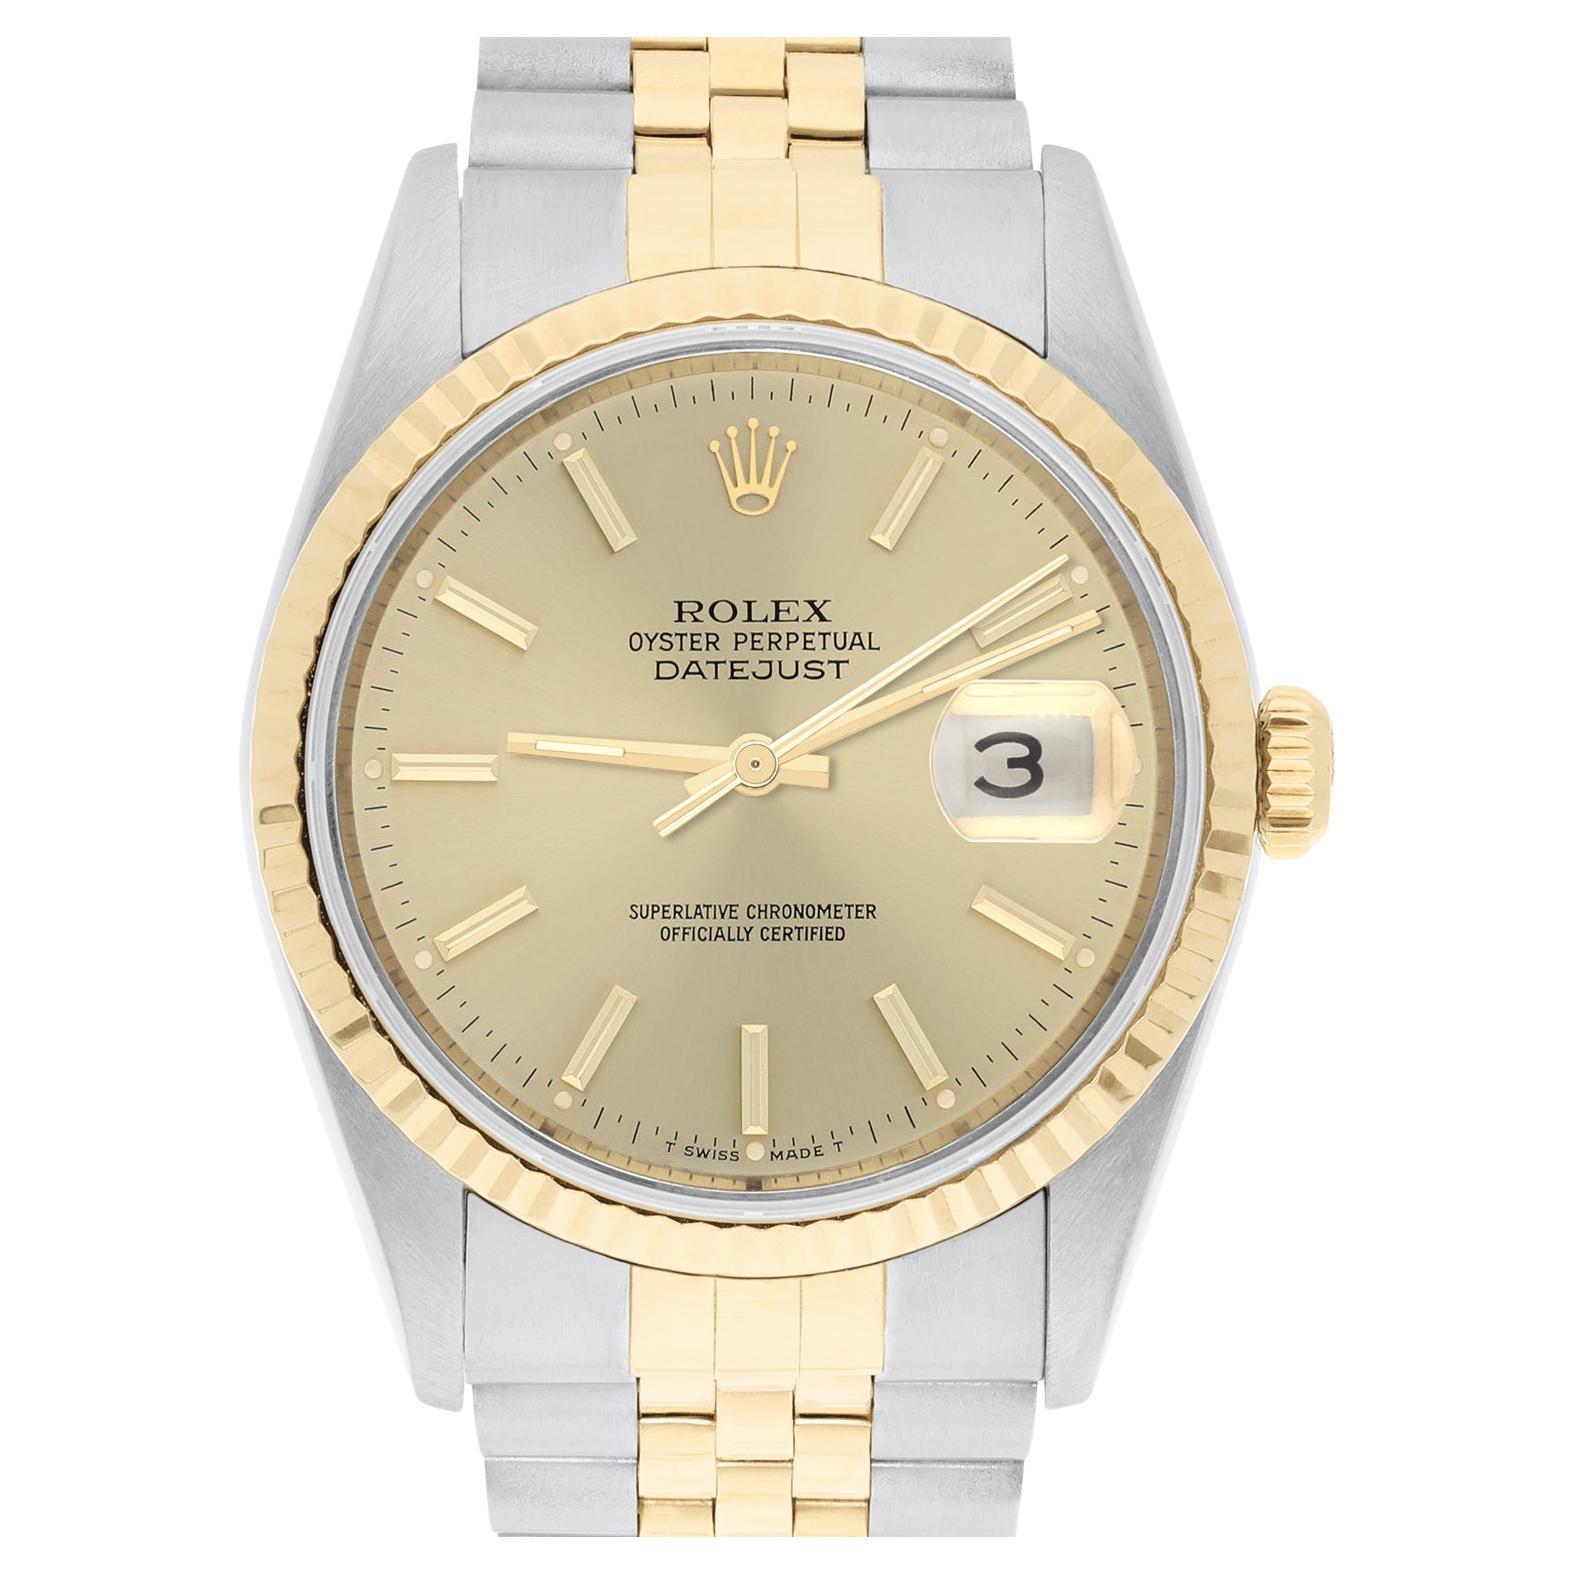 Rolex Datejust 36mm Two Tone Champagne Index Dial Jubilee 16233 Circa 1995